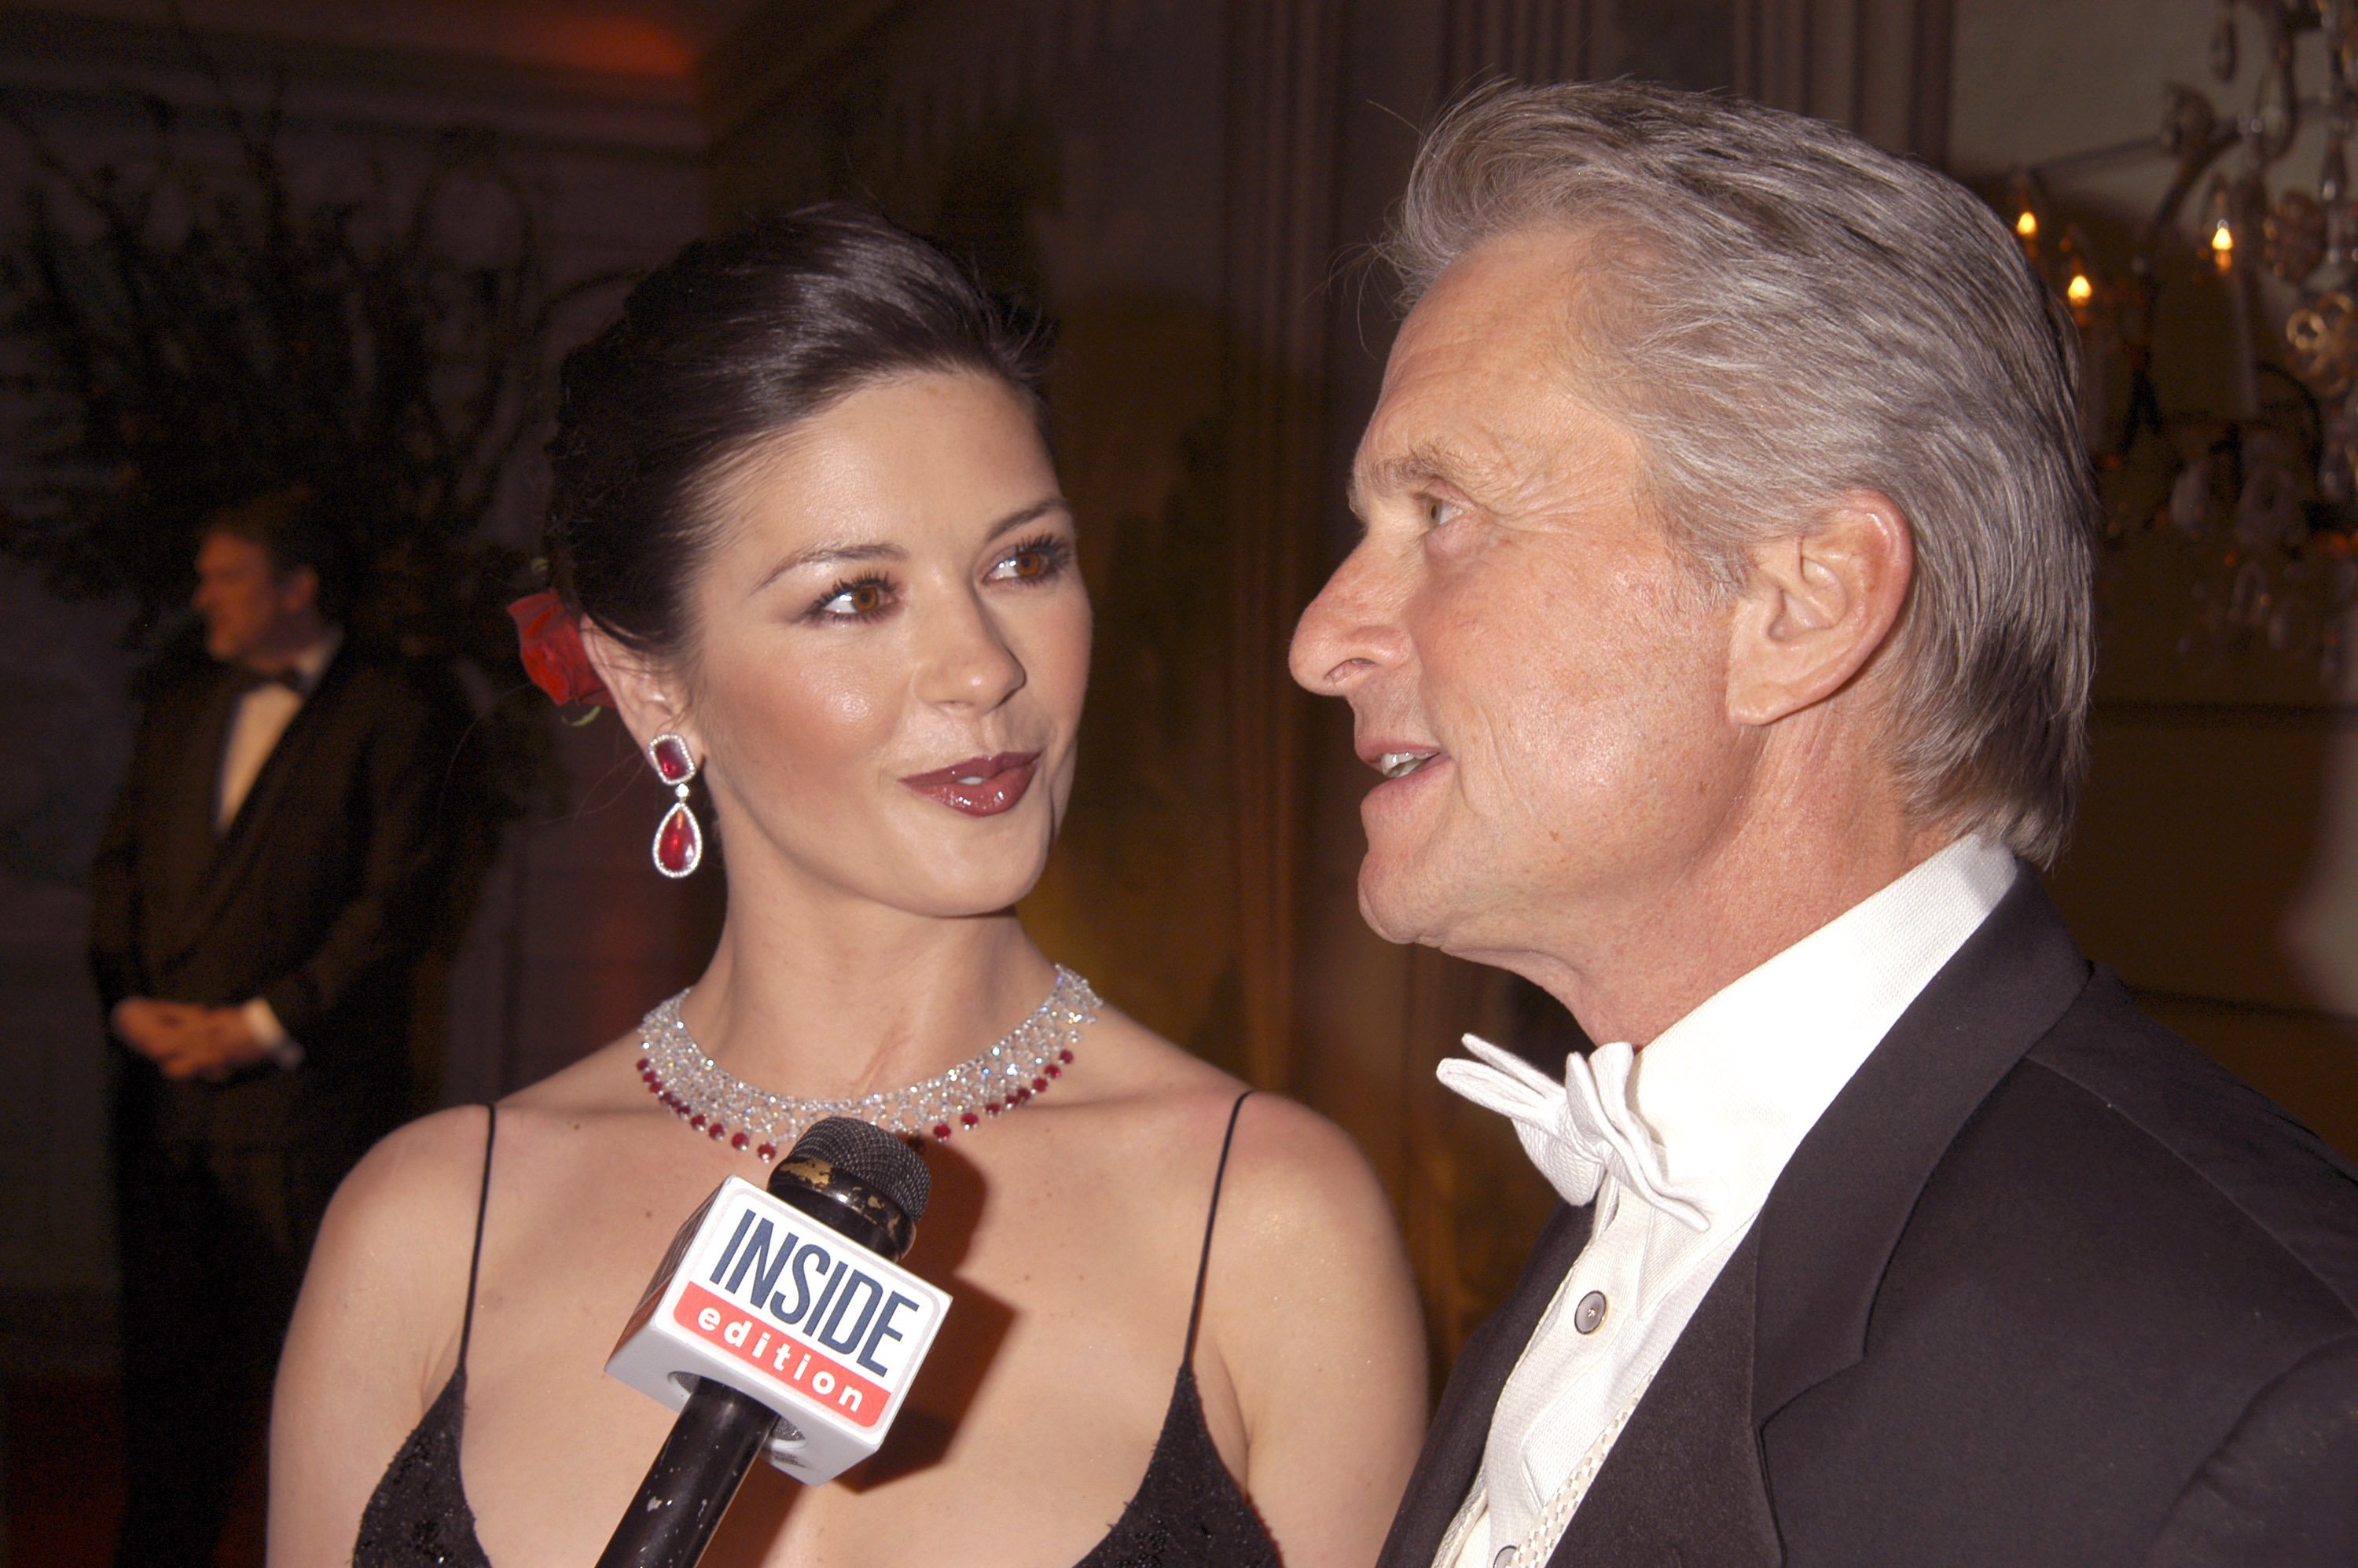 Actress Catherine Zeta-Jones and her husband actor Michael Douglas during The Eighth Red Ball at Pierre Hotel on February 7, 2005 in New York City, New York ┃Source: Getty Images